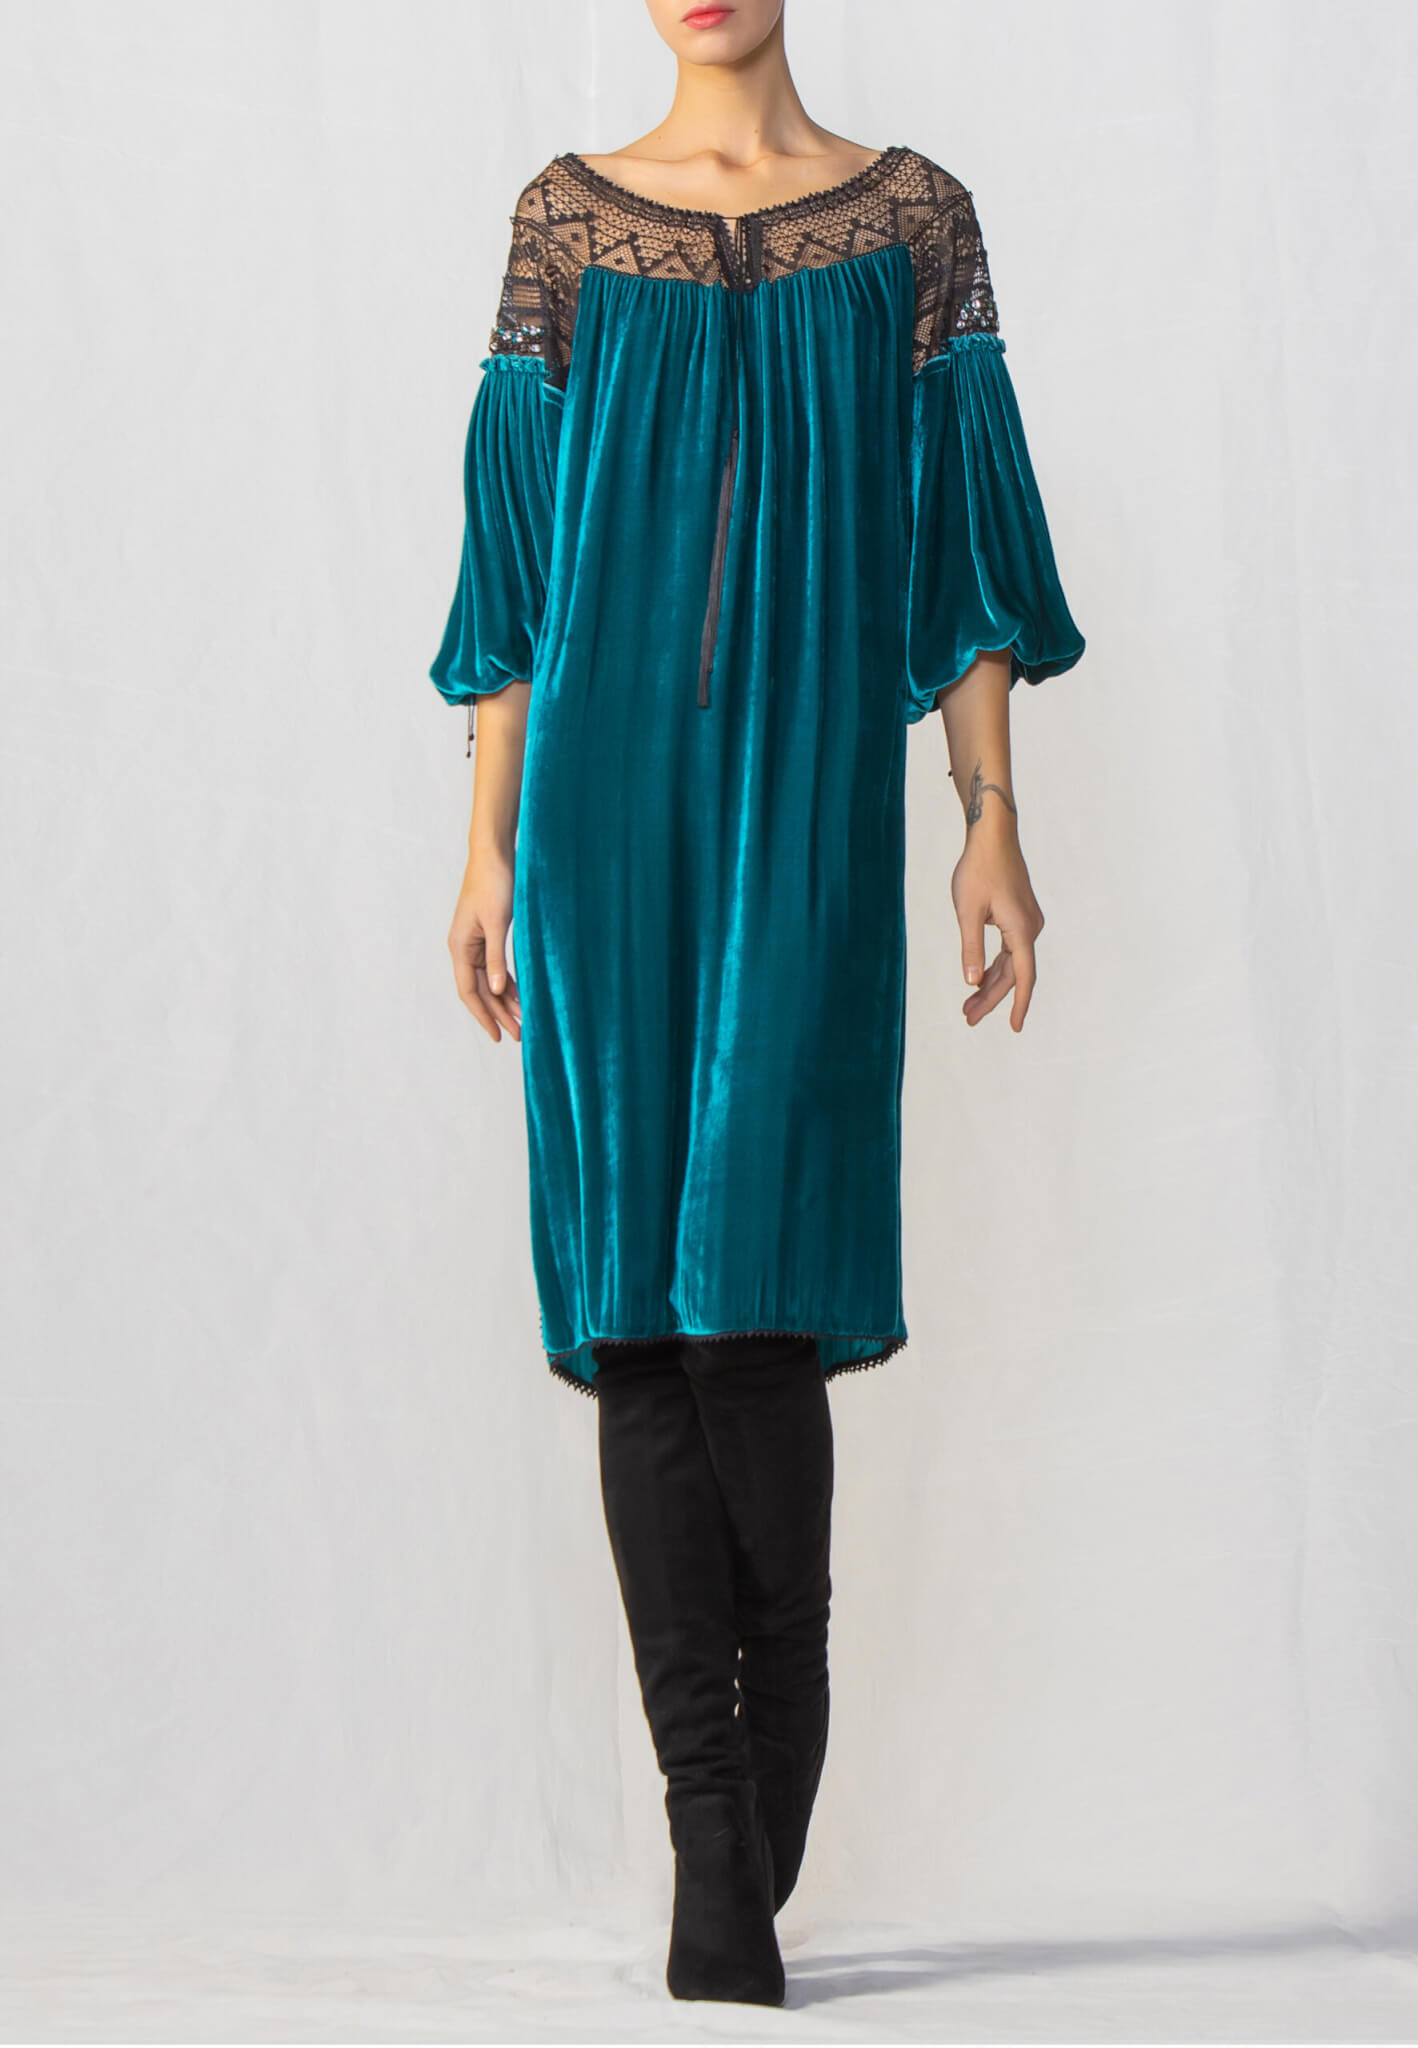 Velour dress with lace and beads